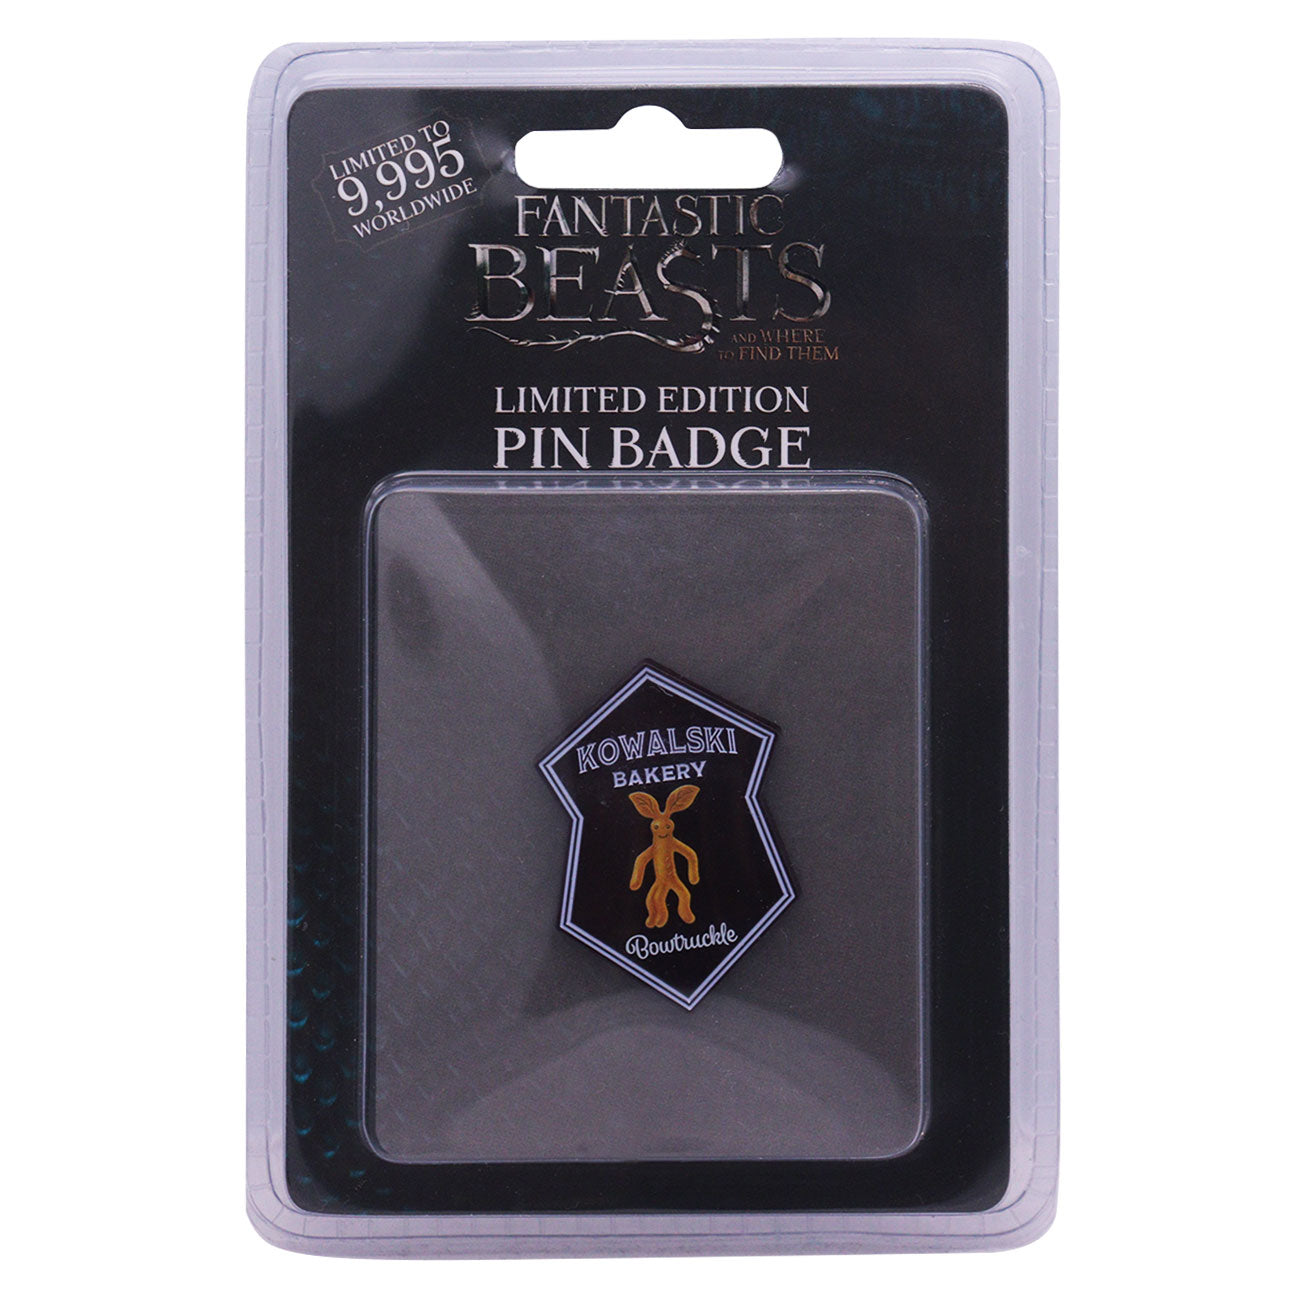 Fantastic Beasts Limited Edition Bowtruckle Pin Badge